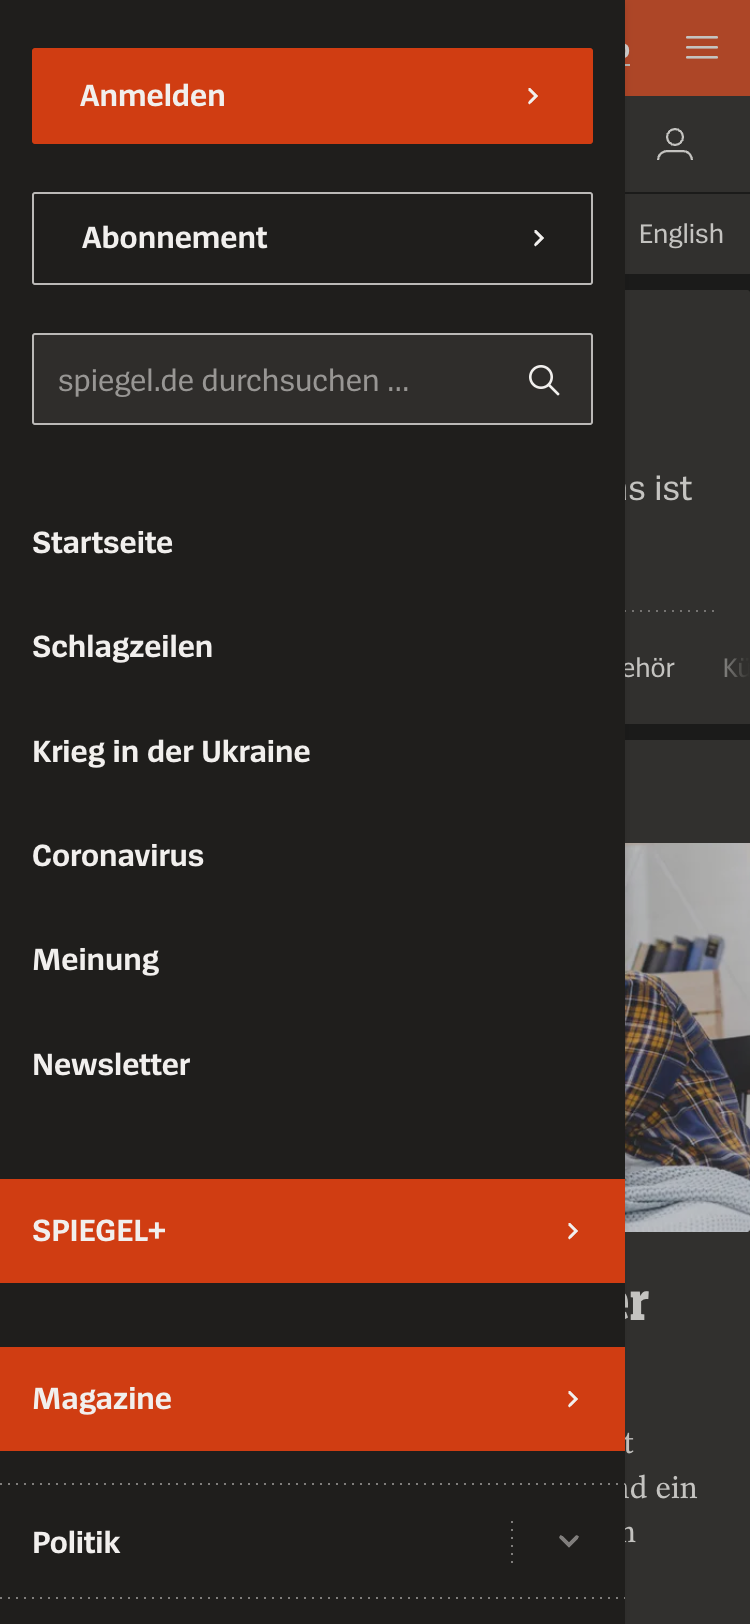 Mobile screenshot of the Der Spiegel main navigation. The navigation overlay covers the screen and contains a list of page links and a search bar.